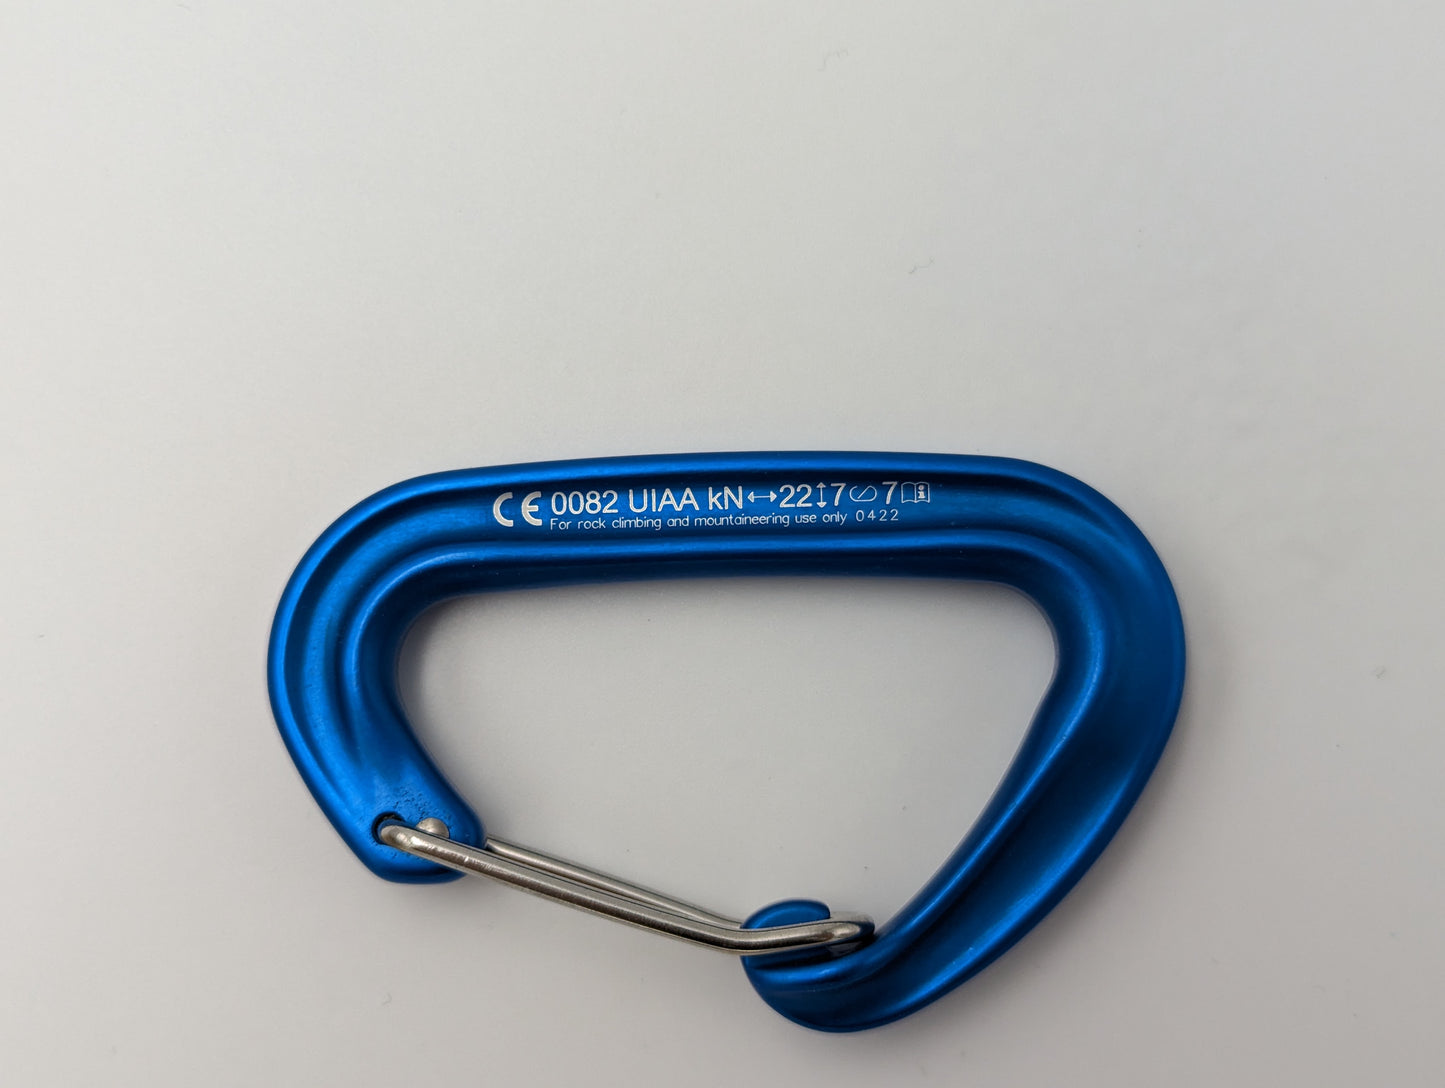 I don't climb but, REAL climbing carabiners for keys - this one is